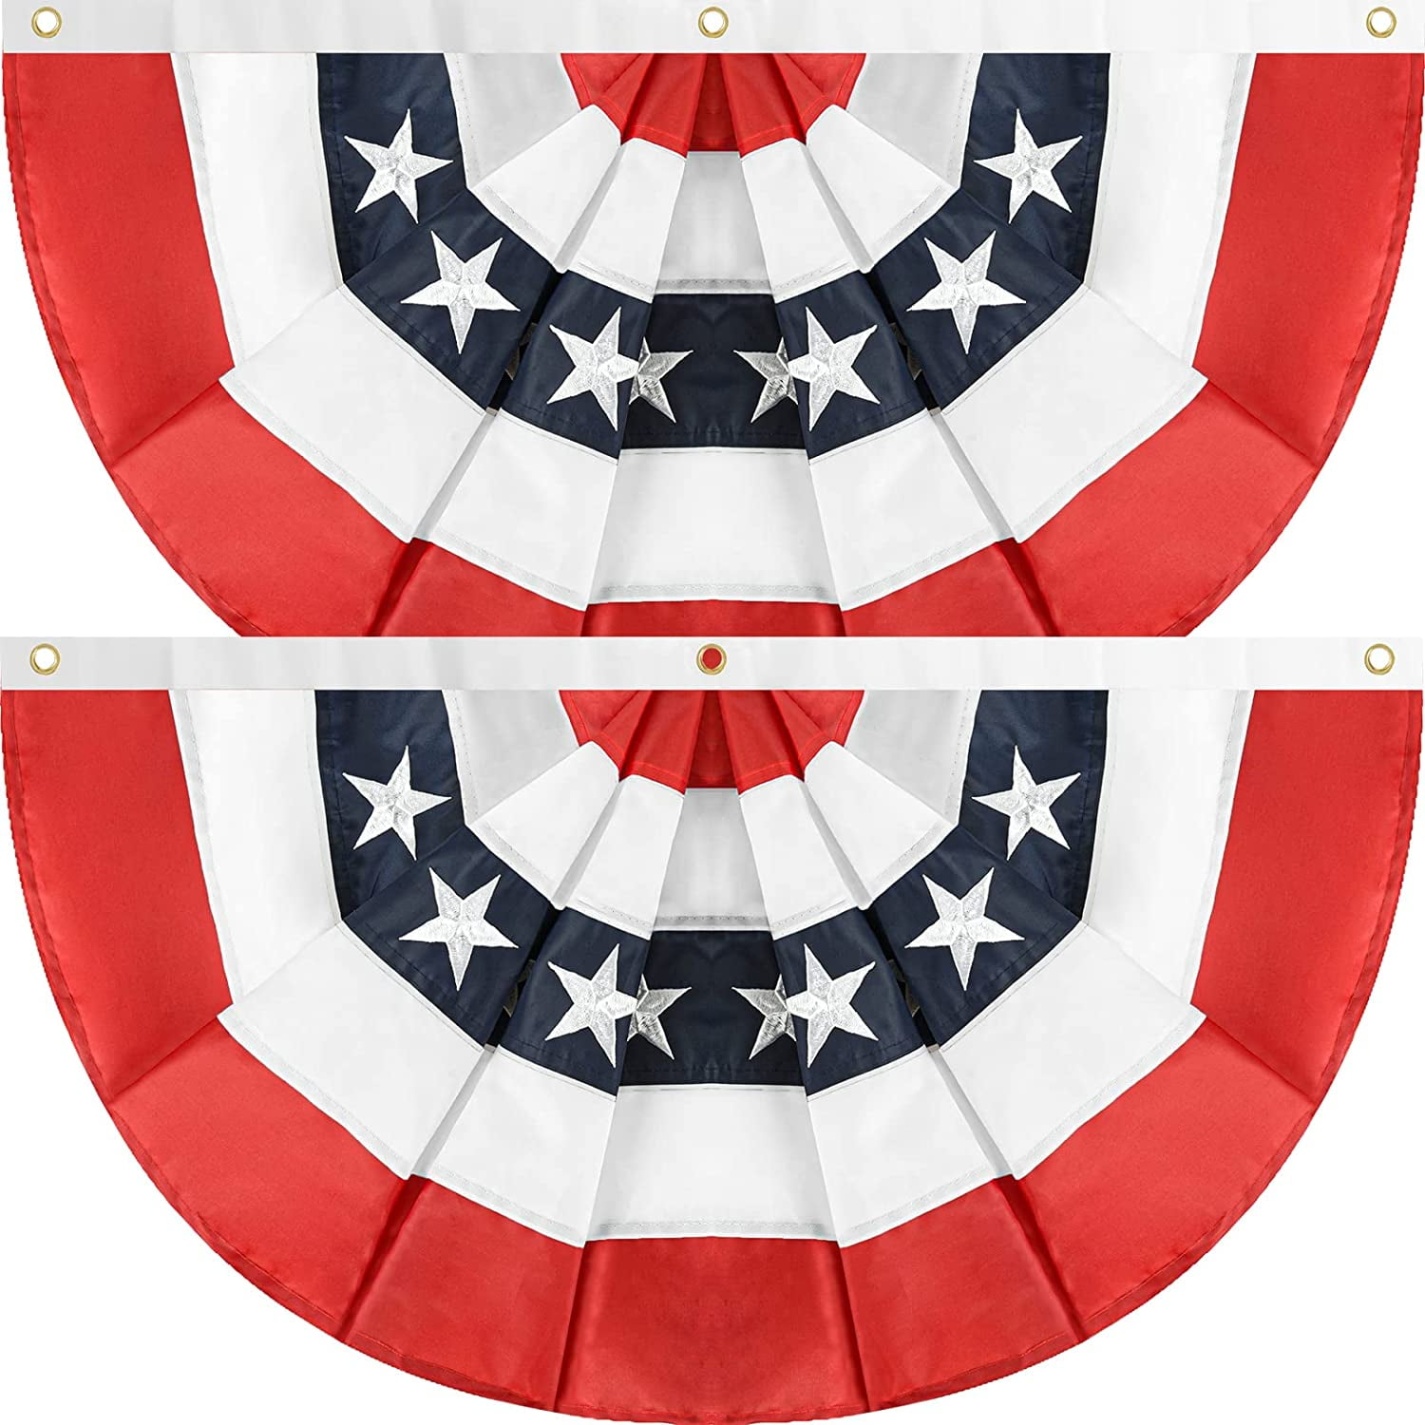 american flag decorations Bulan 2 th of July Decorations Outdoor, Bunting Flags Outdoor for Home